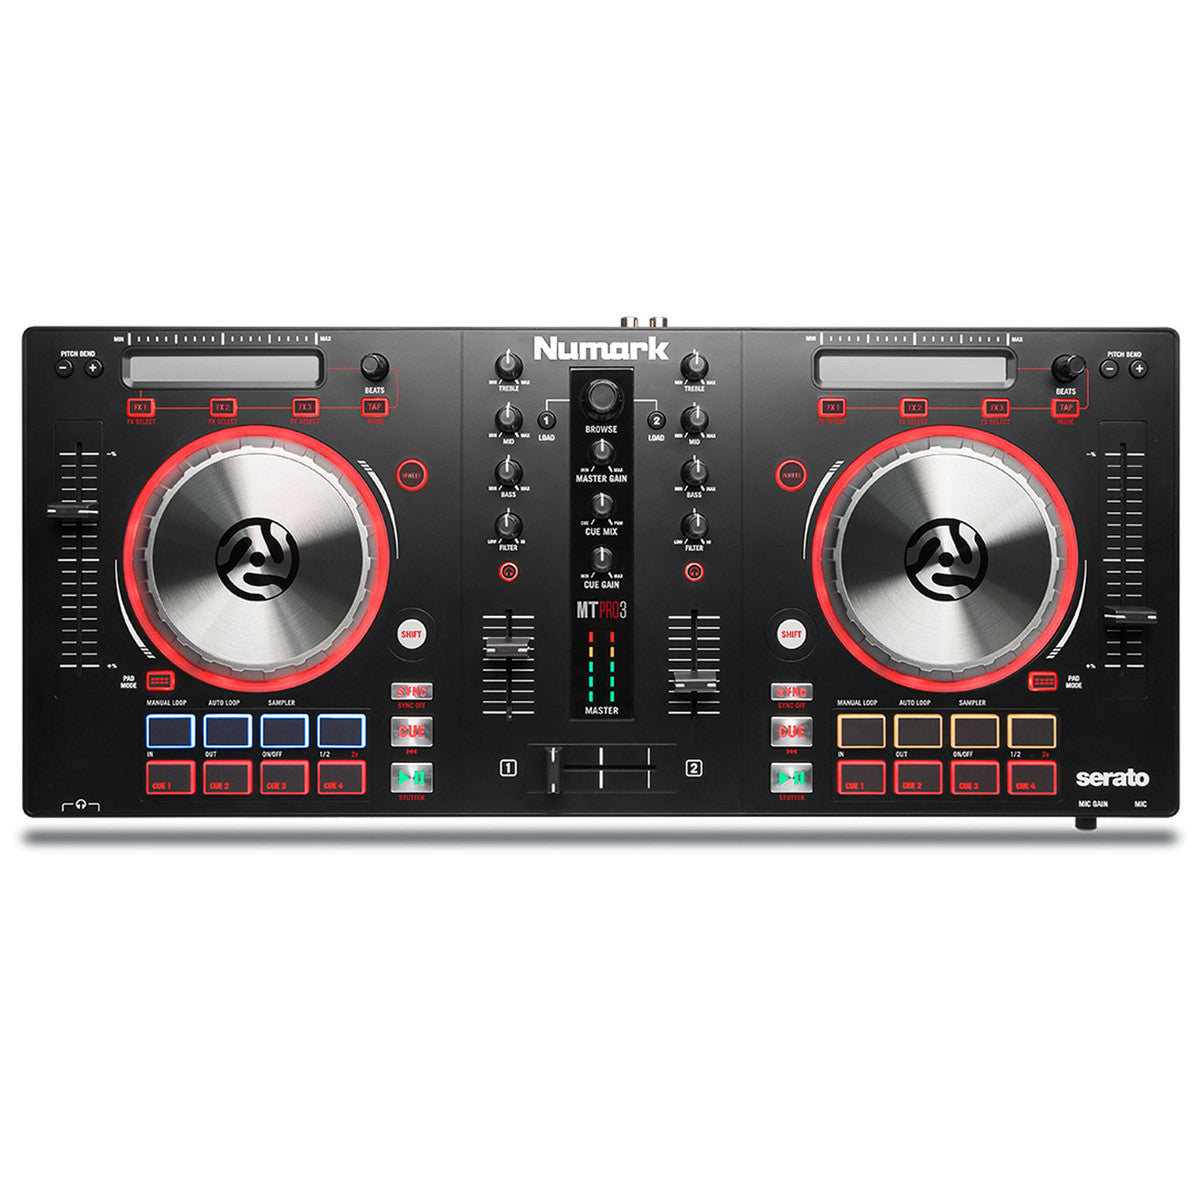 NUMARK MIXTRACK PRO 3 ALL-IN-ONE DJ CONTROLLER FOR SERATO DJ, NUMARK, DJ GEAR, numark-dj-gear-num-mixtrackpro3, ZOSO MUSIC SDN BHD